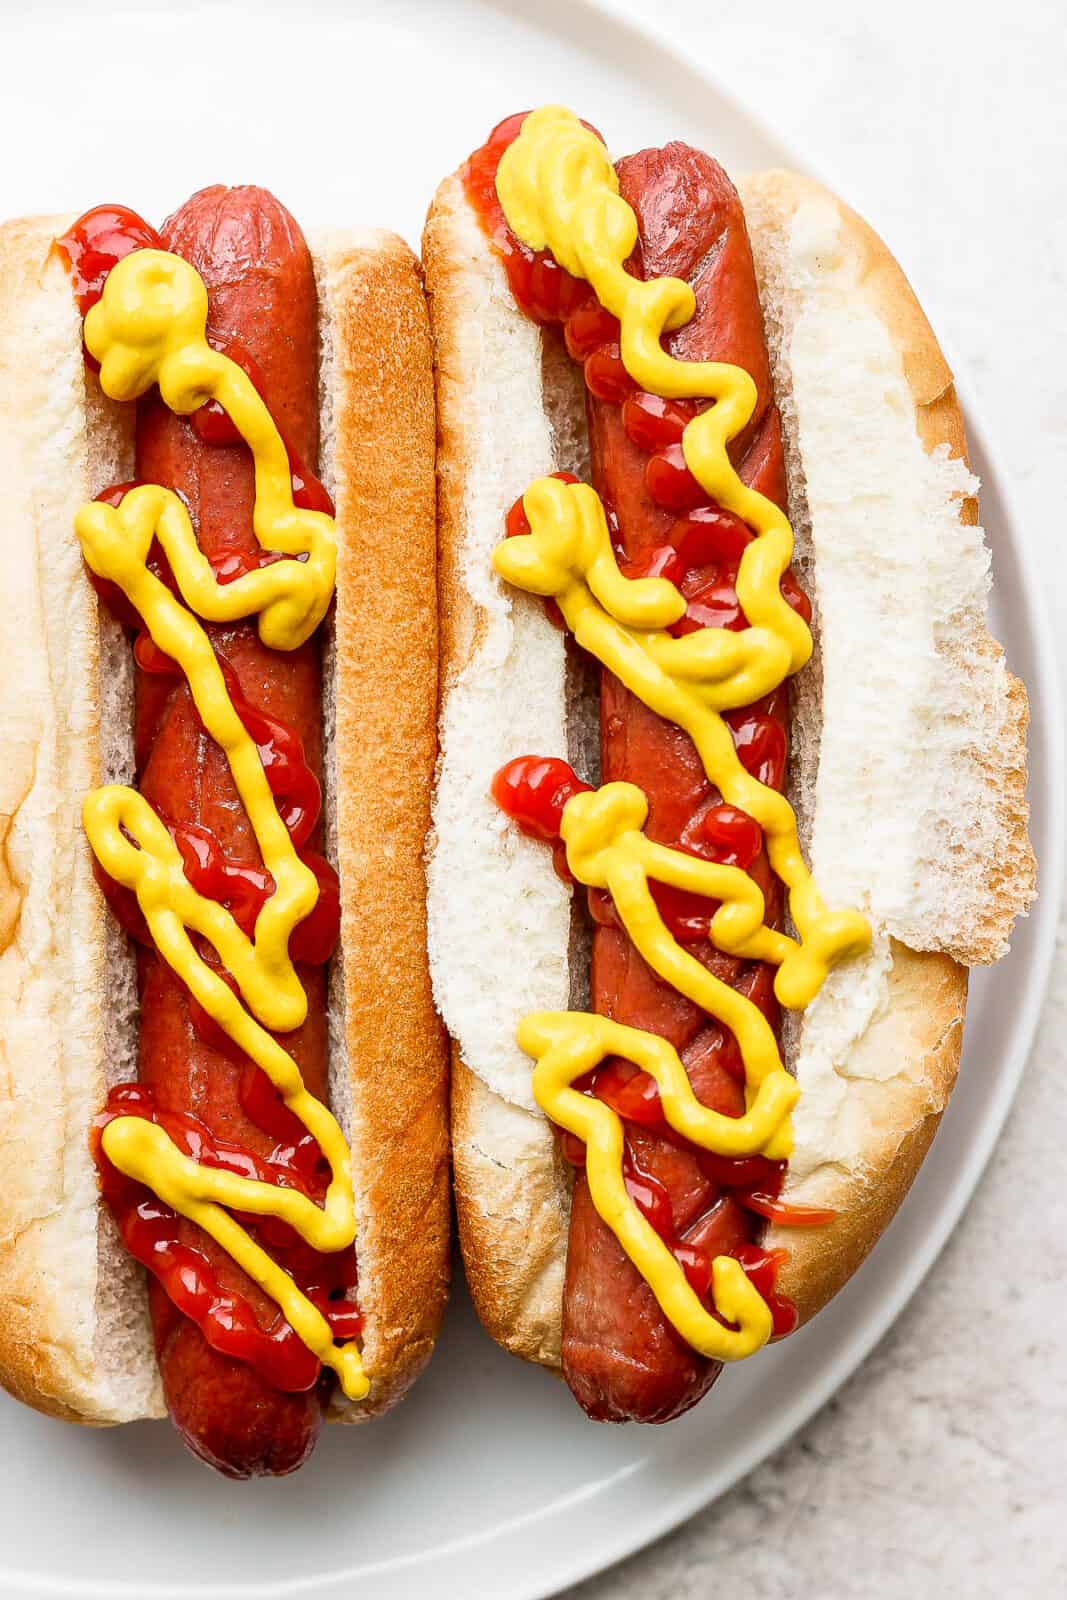 Easy air fried hot dogs on buns with ketchup and mustard.